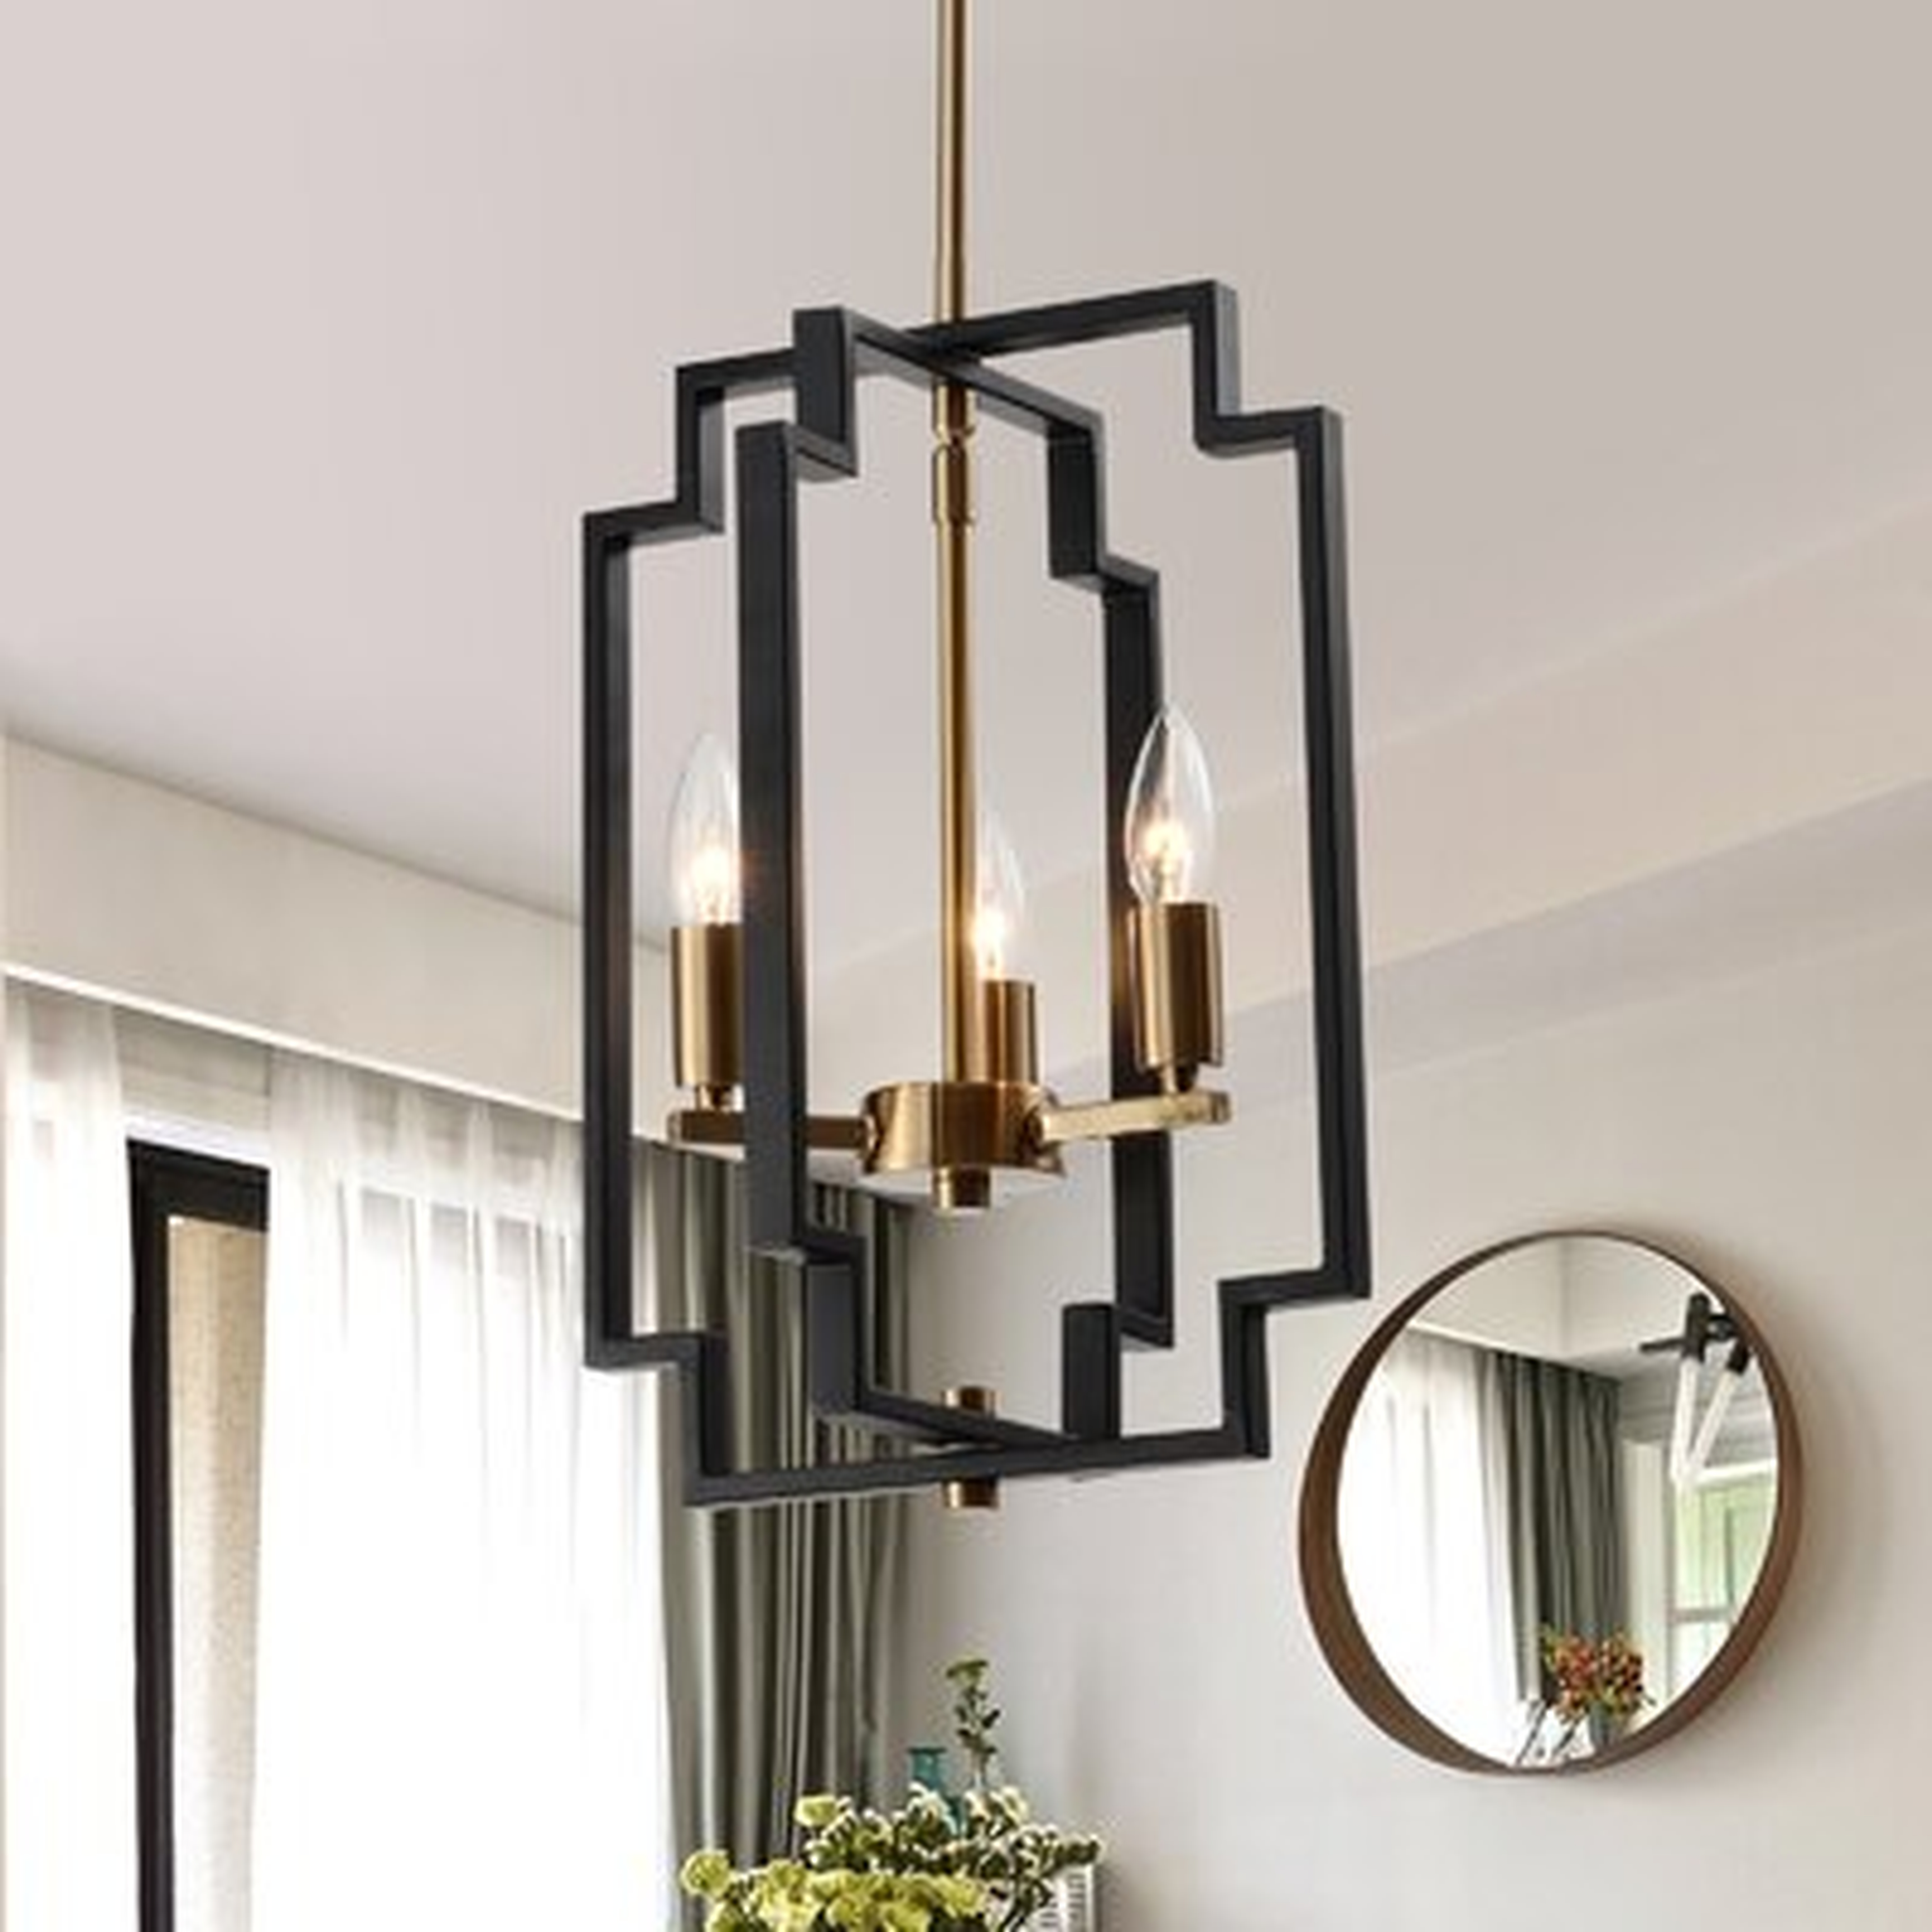 Bartow 3 - Light Rectangle Chandelier with Wrought Iron Accents - Wayfair